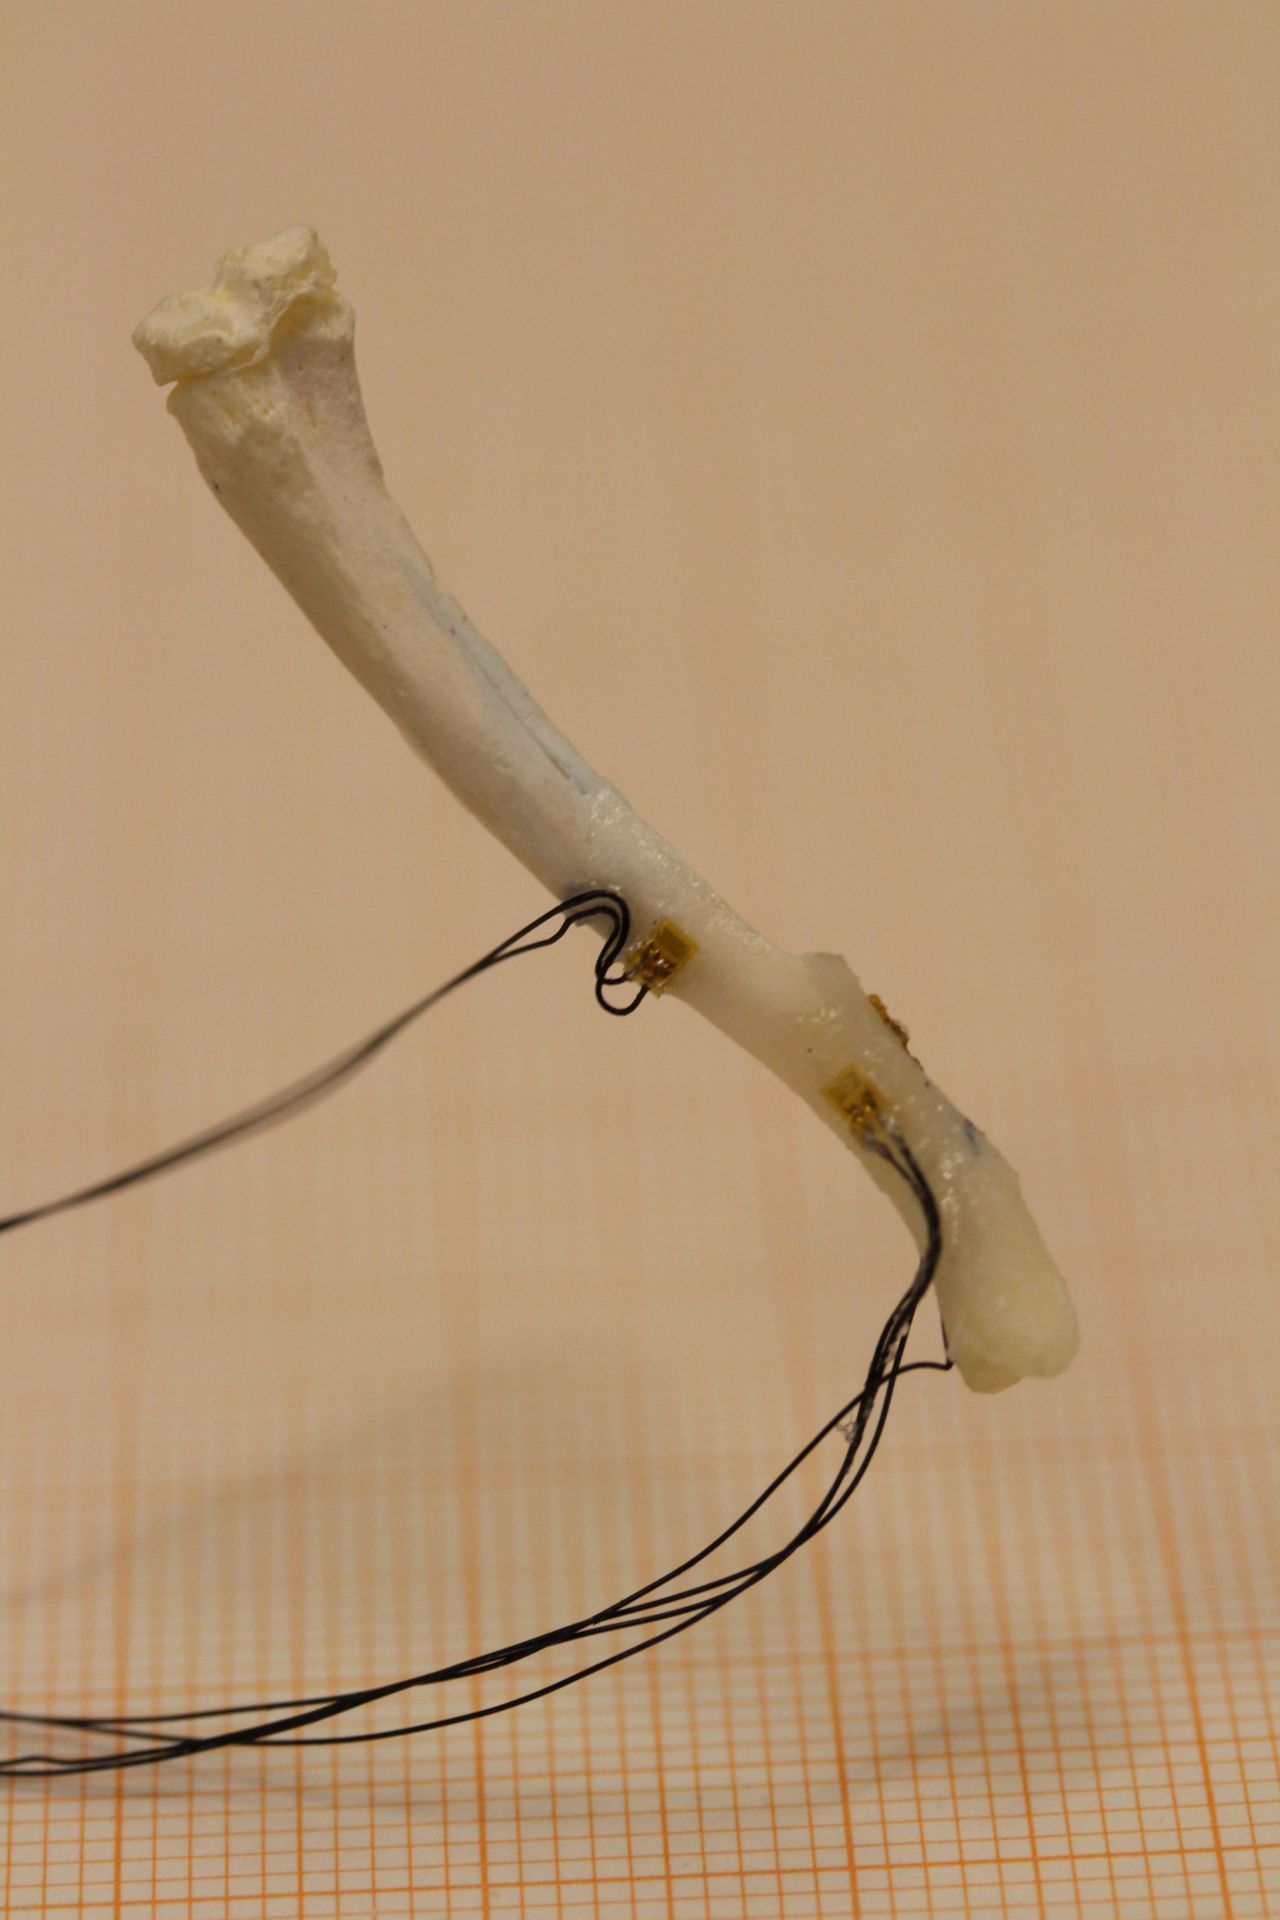 Bone with attached sensors